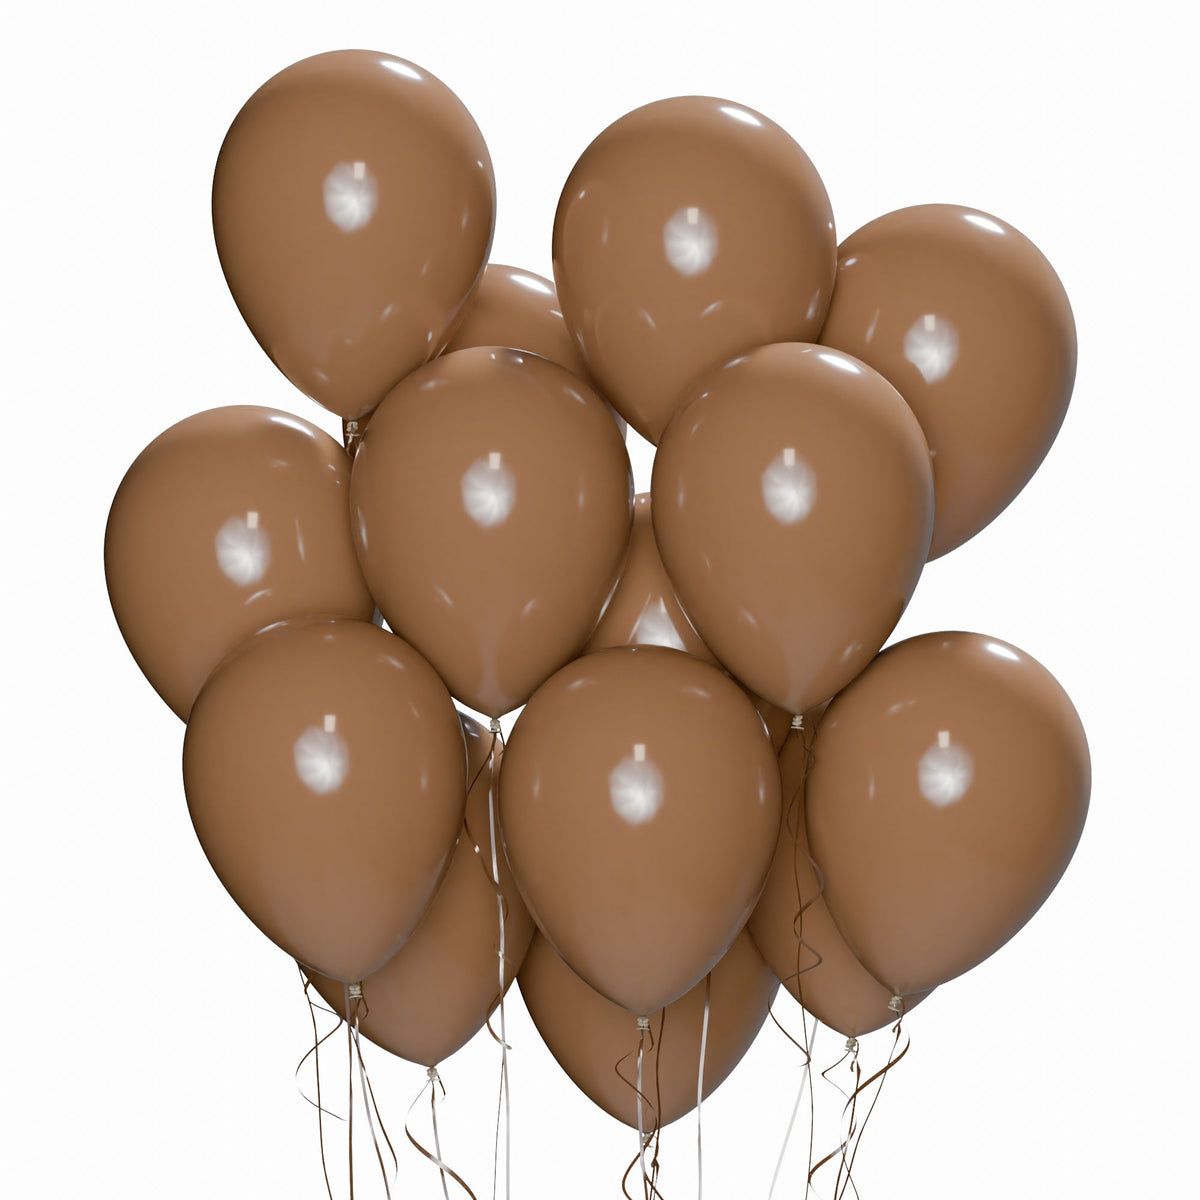 WIDE OCEAN INTERNATIONAL TRADE BEIJING CO., LTD Balloons Coffee Brown Latex Balloon 12 Inches, 15 Count 810077652664